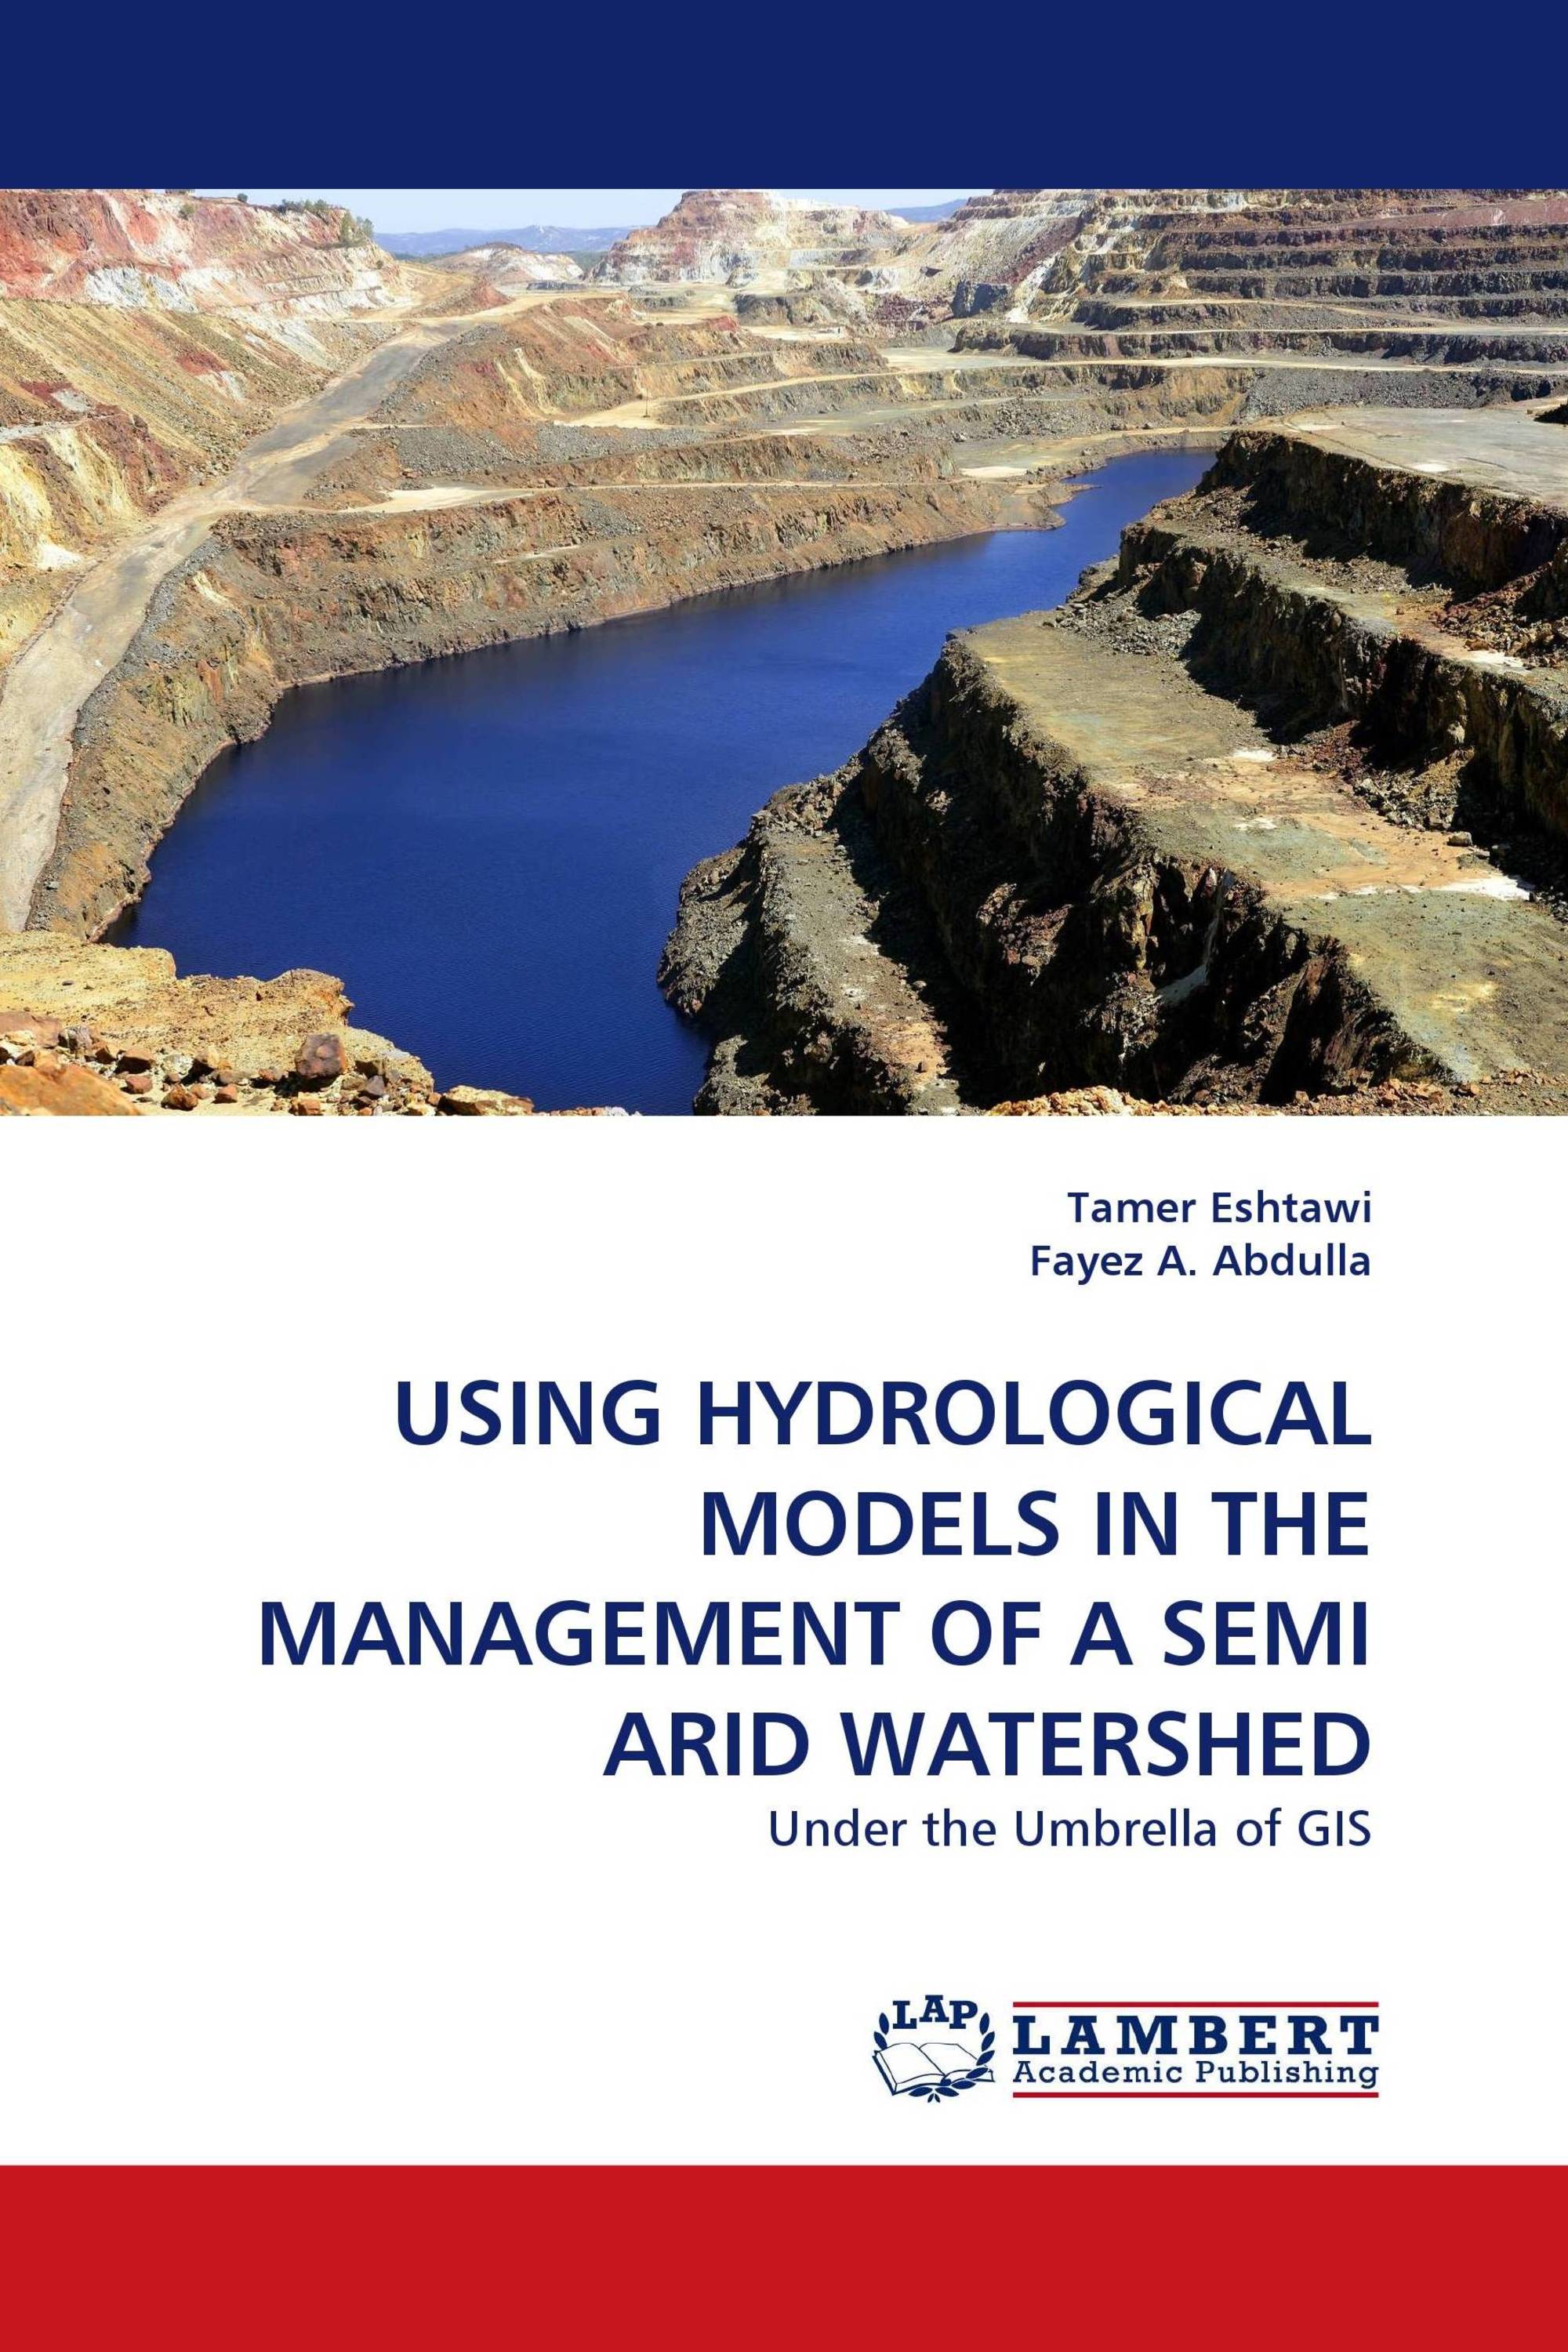 USING HYDROLOGICAL MODELS IN THE MANAGEMENT OF A SEMI ARID WATERSHED